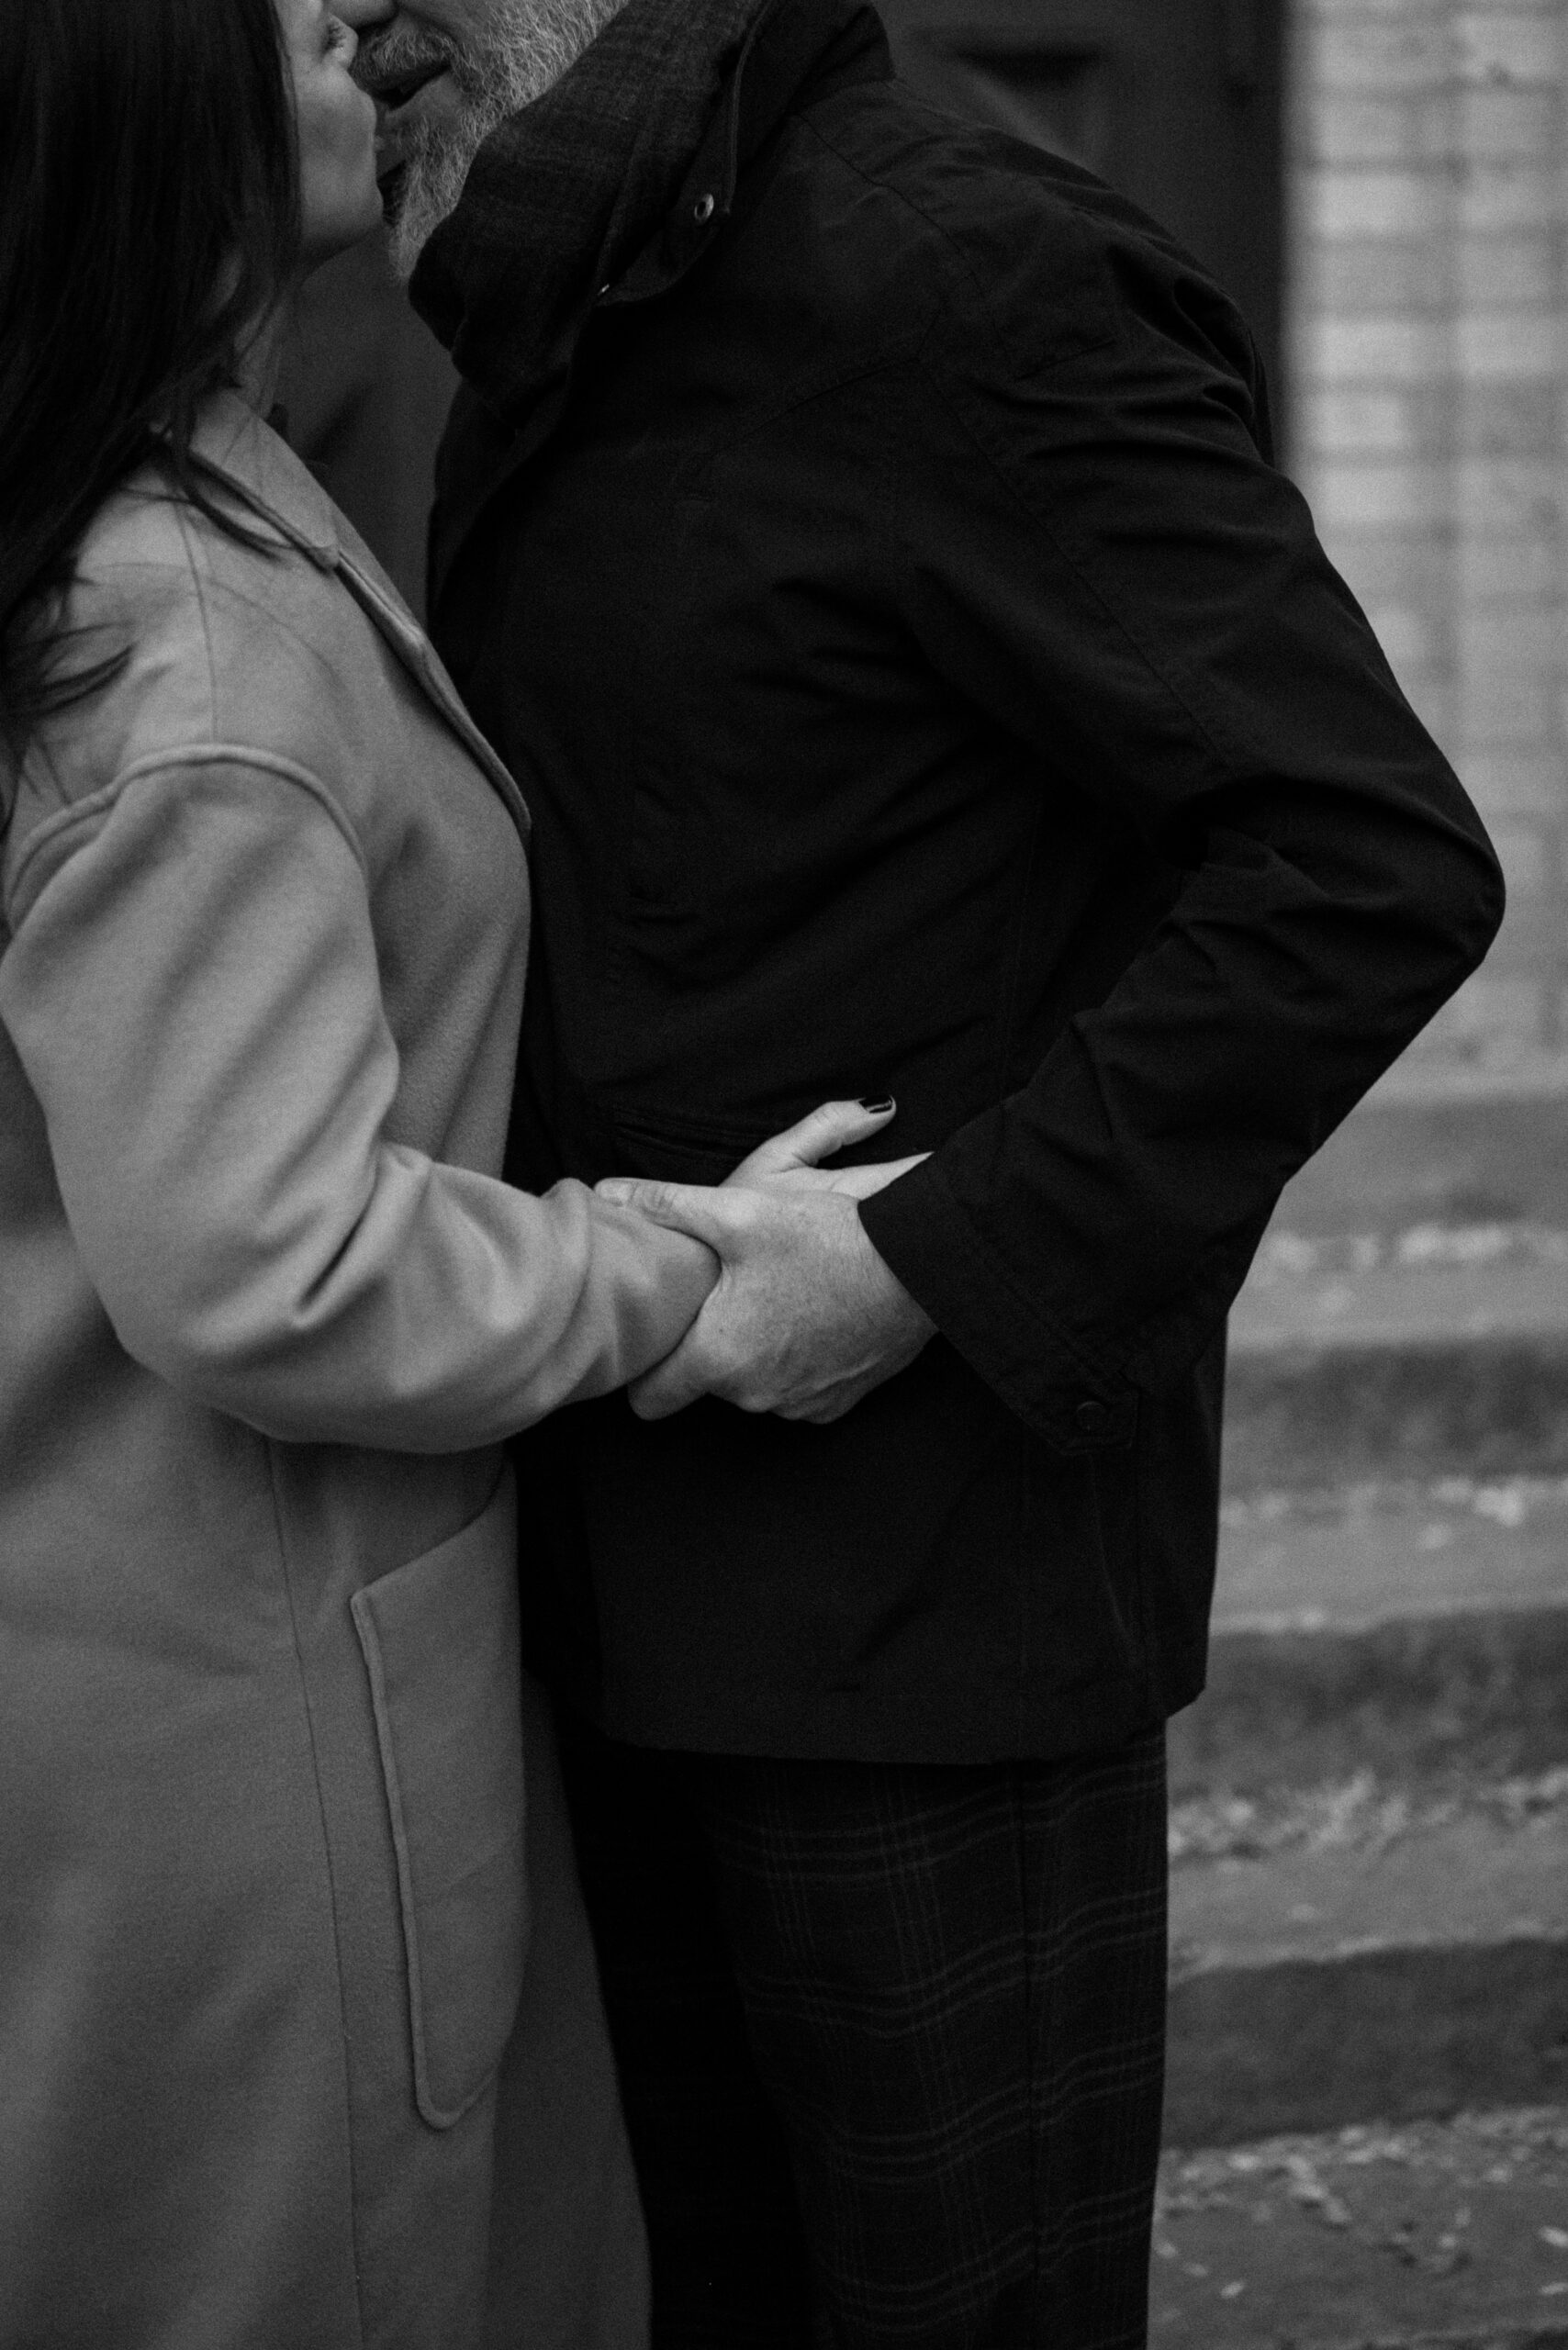 A black and white photo of an engaged couple embracing and kissing one another in front of The Smiley Building in Durango, Colorado for their engagement session, taken by Colorado wedding photographer, Ashley Joyce.